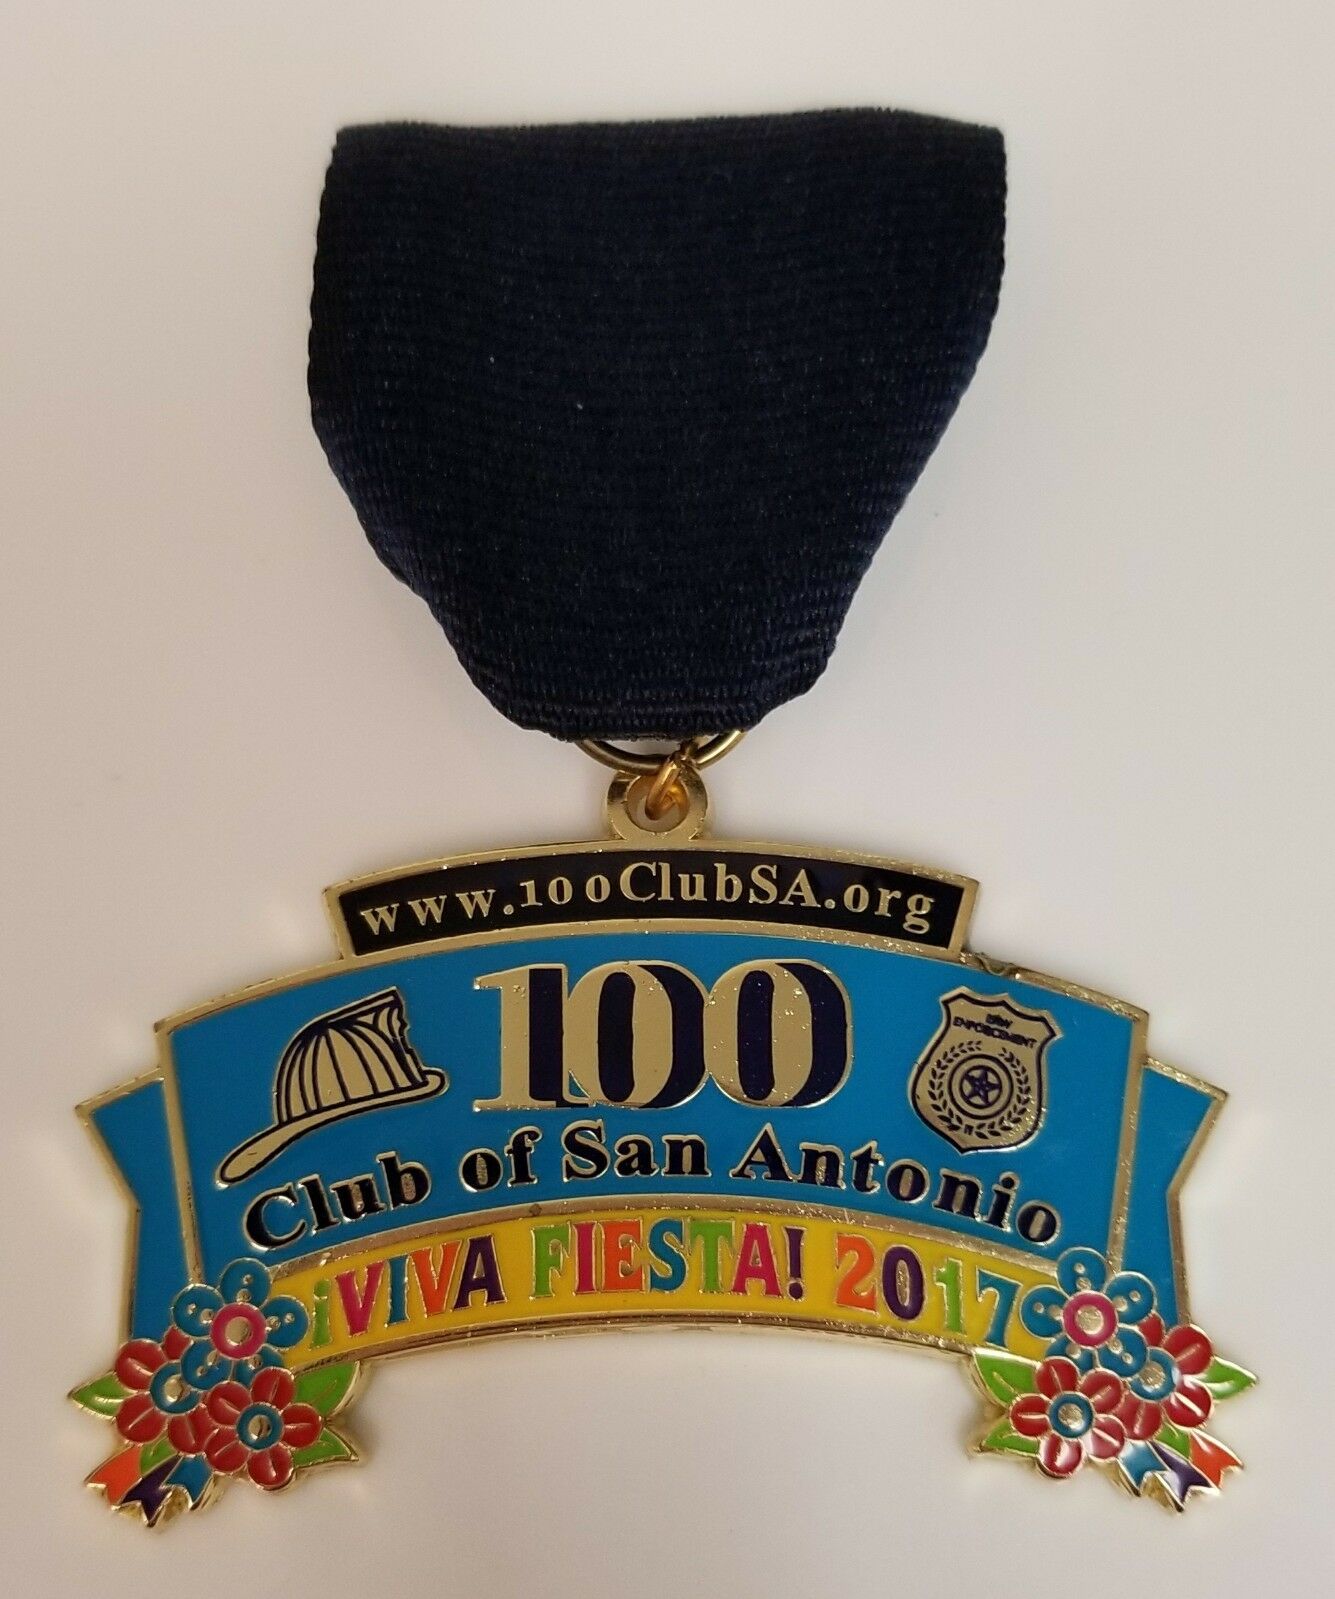 New 2017 Fiesta Medal 100 Club Of San Antonio (police And Fire Department)